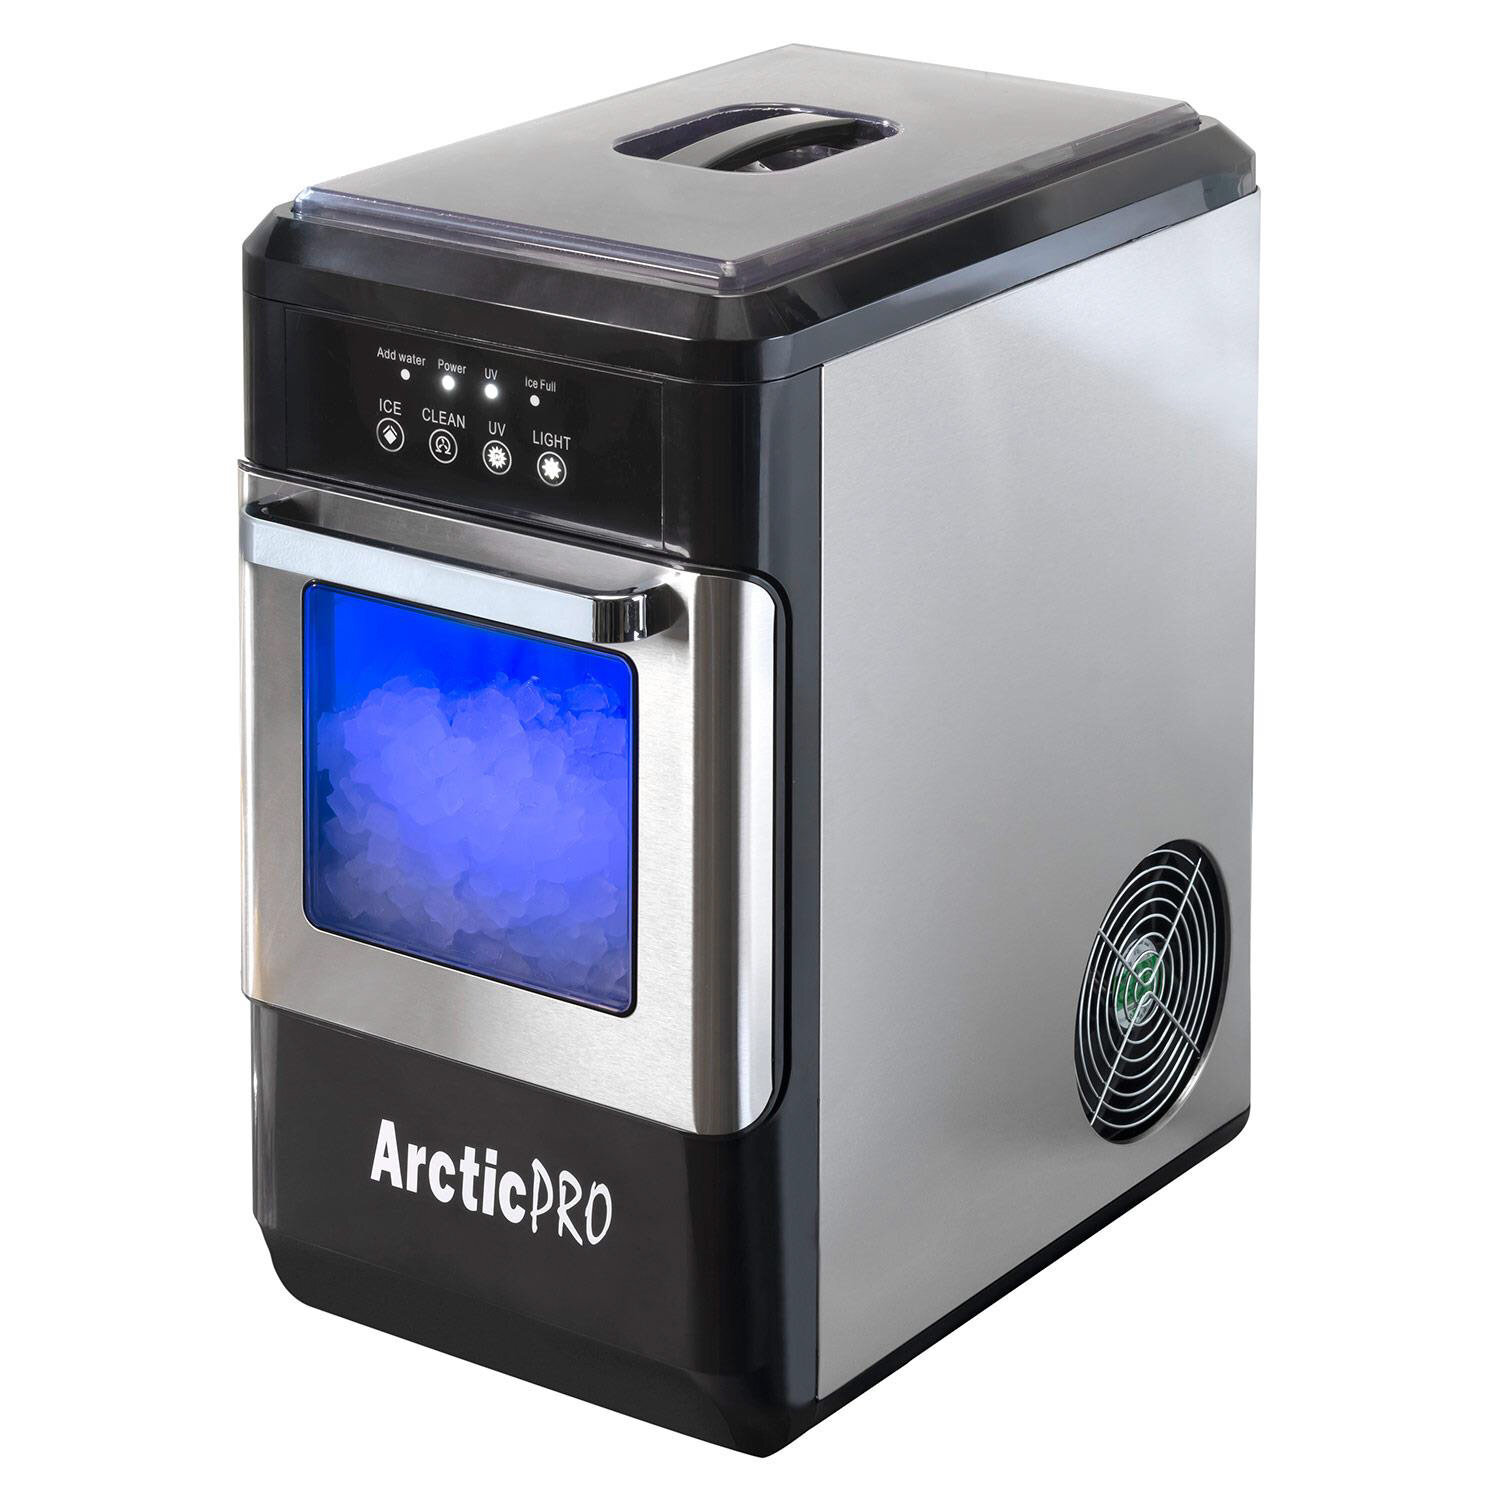 Portable Ice Makers for sale in Axton, Virginia